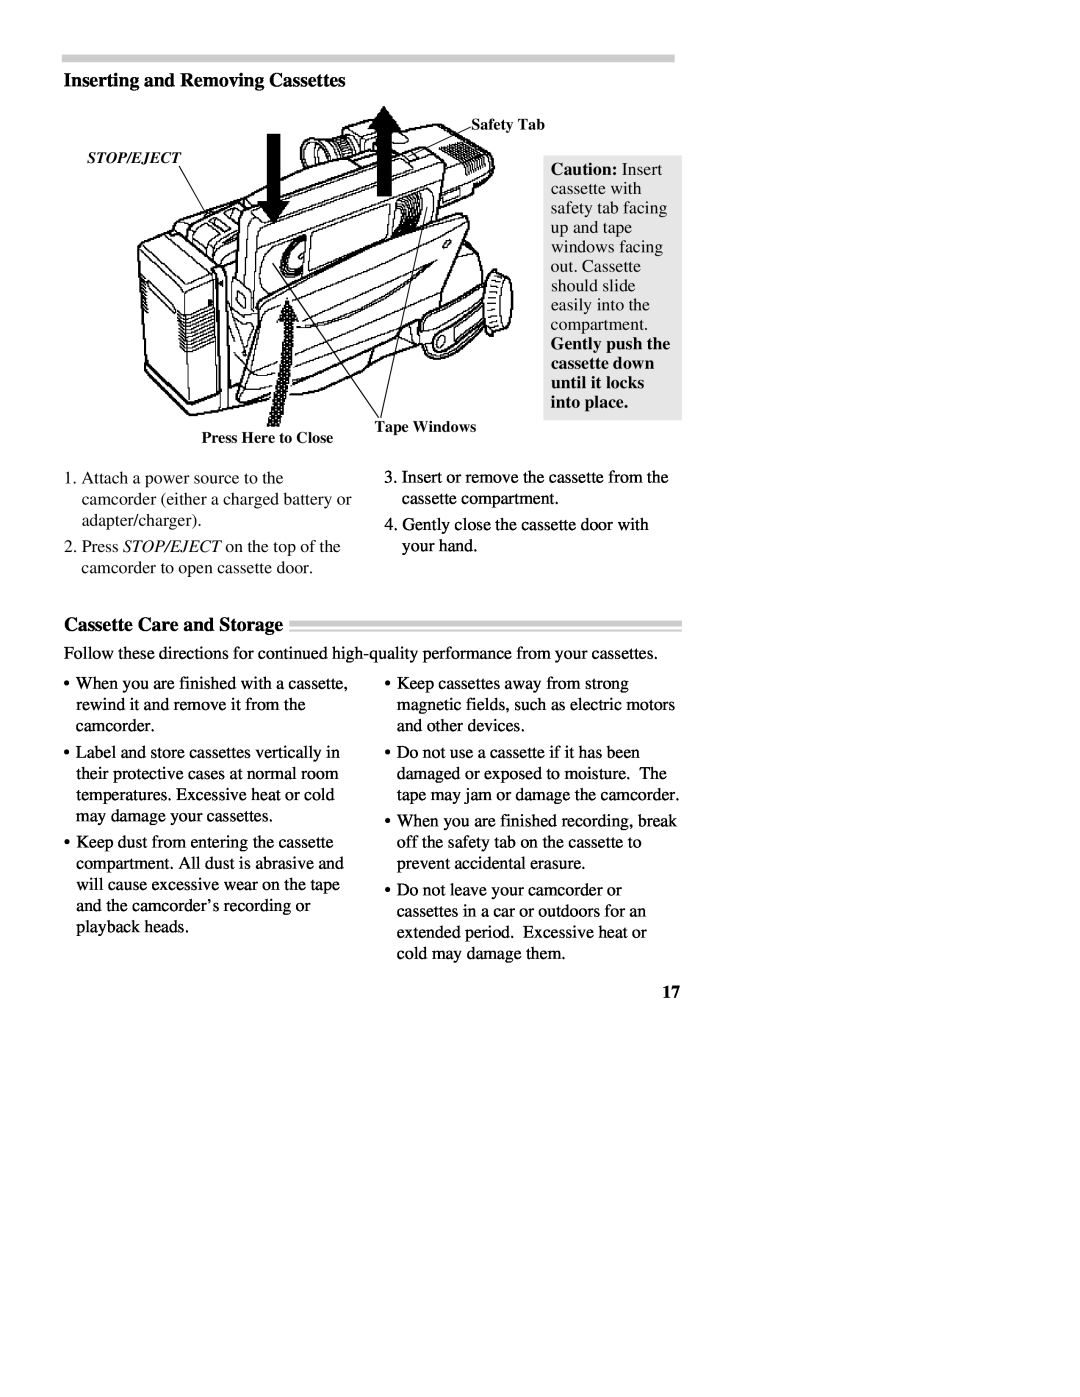 RCA CC437 manual Inserting and Removing Cassettes, Cassette Care and Storage 